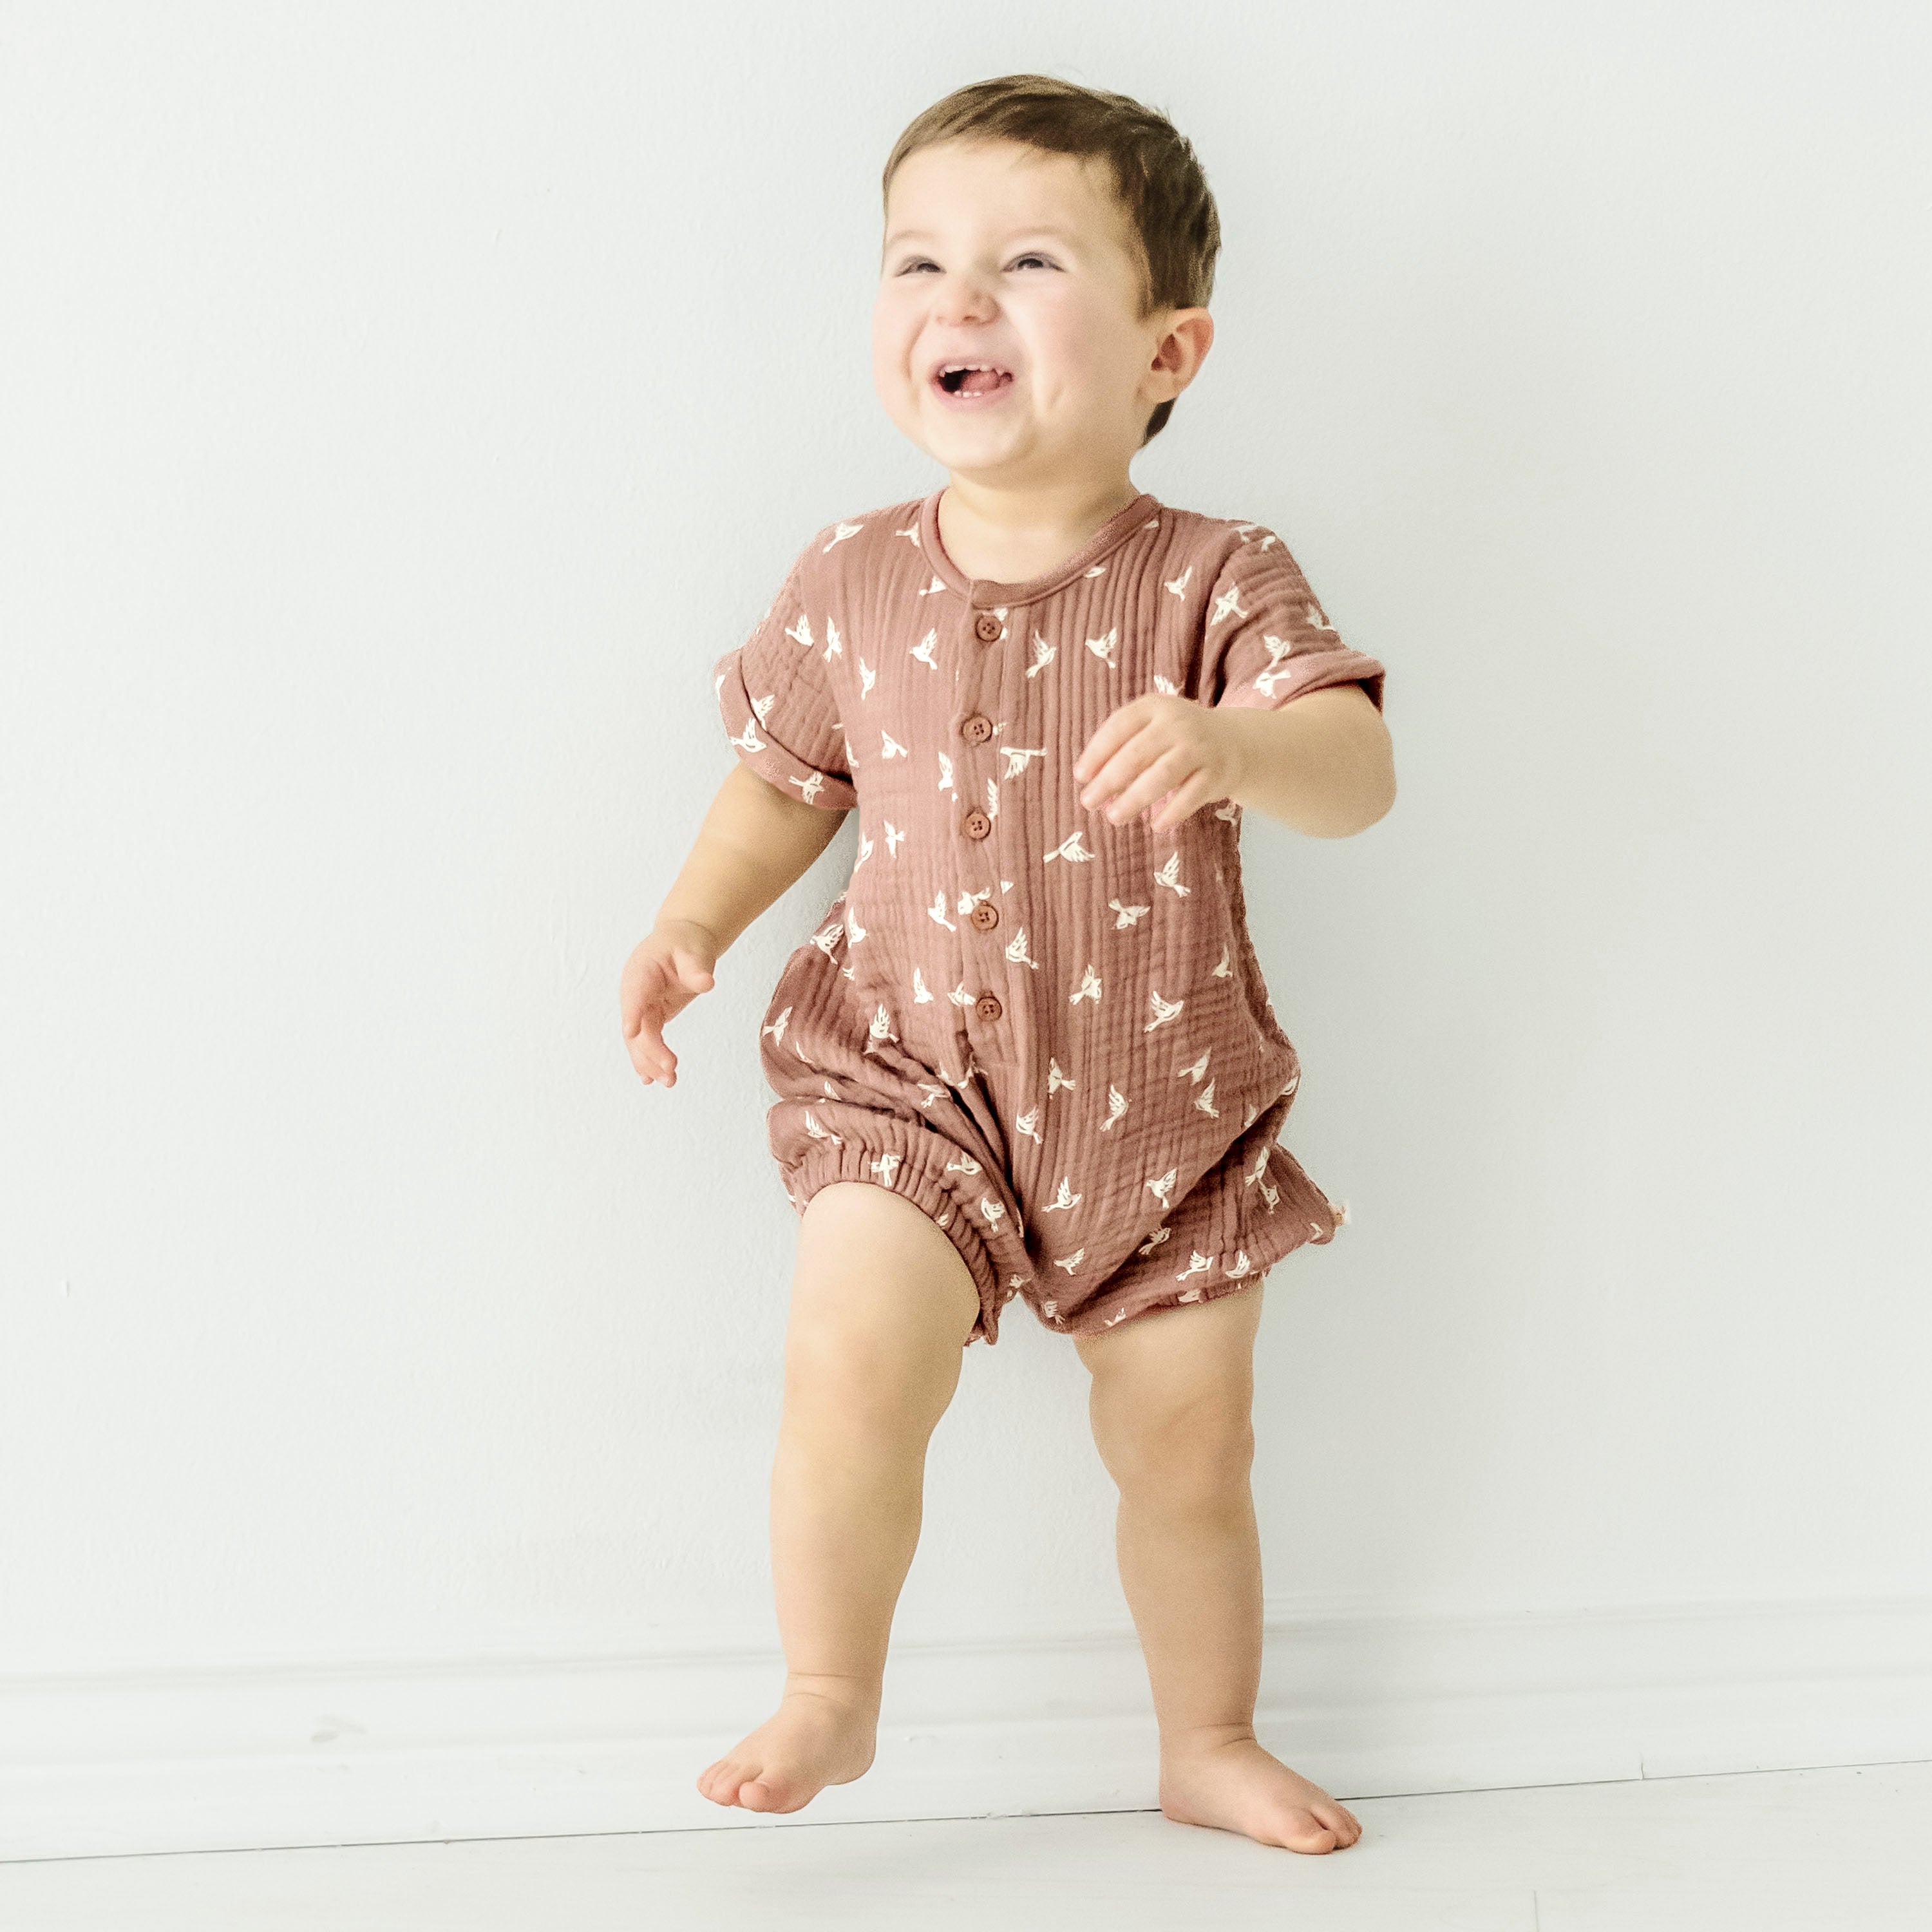 A joyful baby girl in a Makemake Organics Organic Muslin Short Bubble Romper - Flock standing barefoot against a white background, laughing and looking to the side.